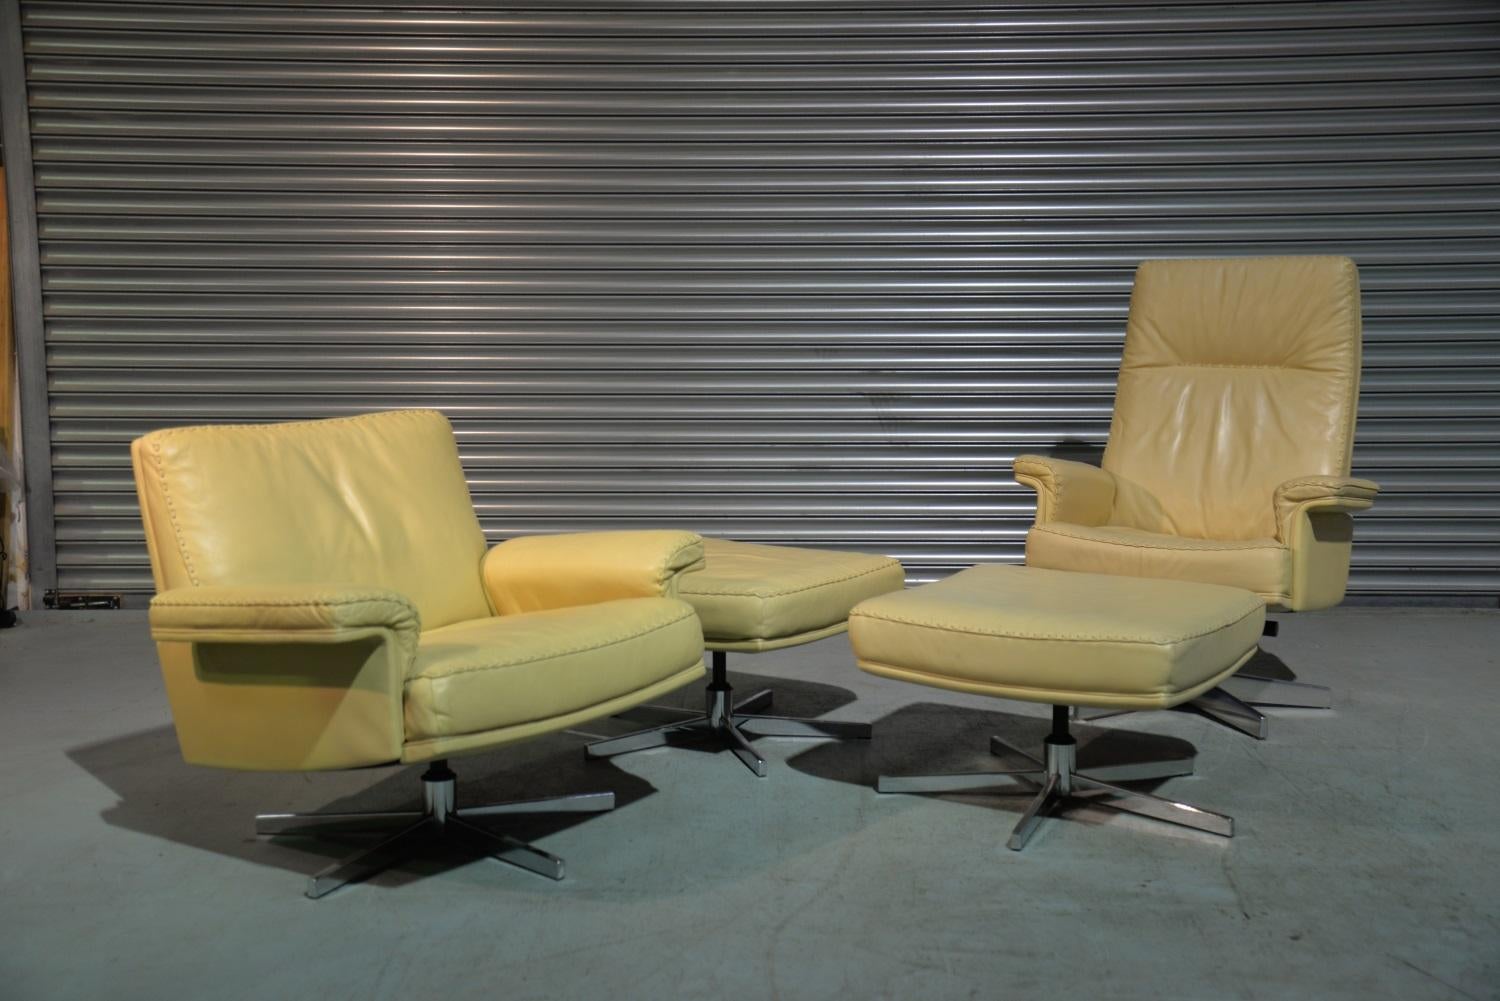 We are delighted to bring to you a highly desirable and rarely available matching pair of De Sede swivel lounge armchairs with ottomans. Built in the 1970s by De Sede craftsman from Switzerland, these matching swivel lounge armchairs are brought to